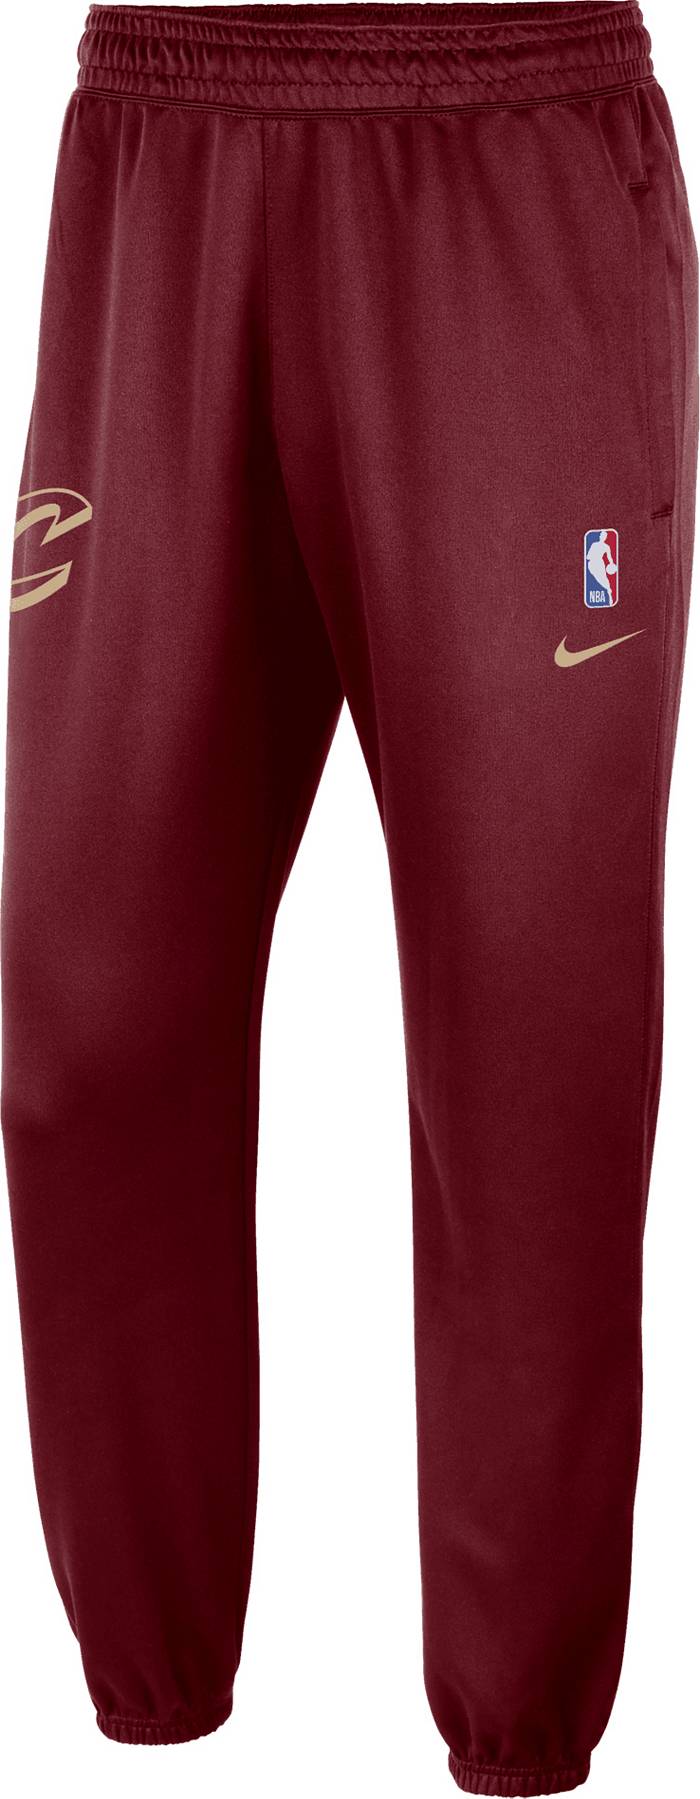 Men's Cleveland Cavaliers Nike Red Showtime Therma Flex